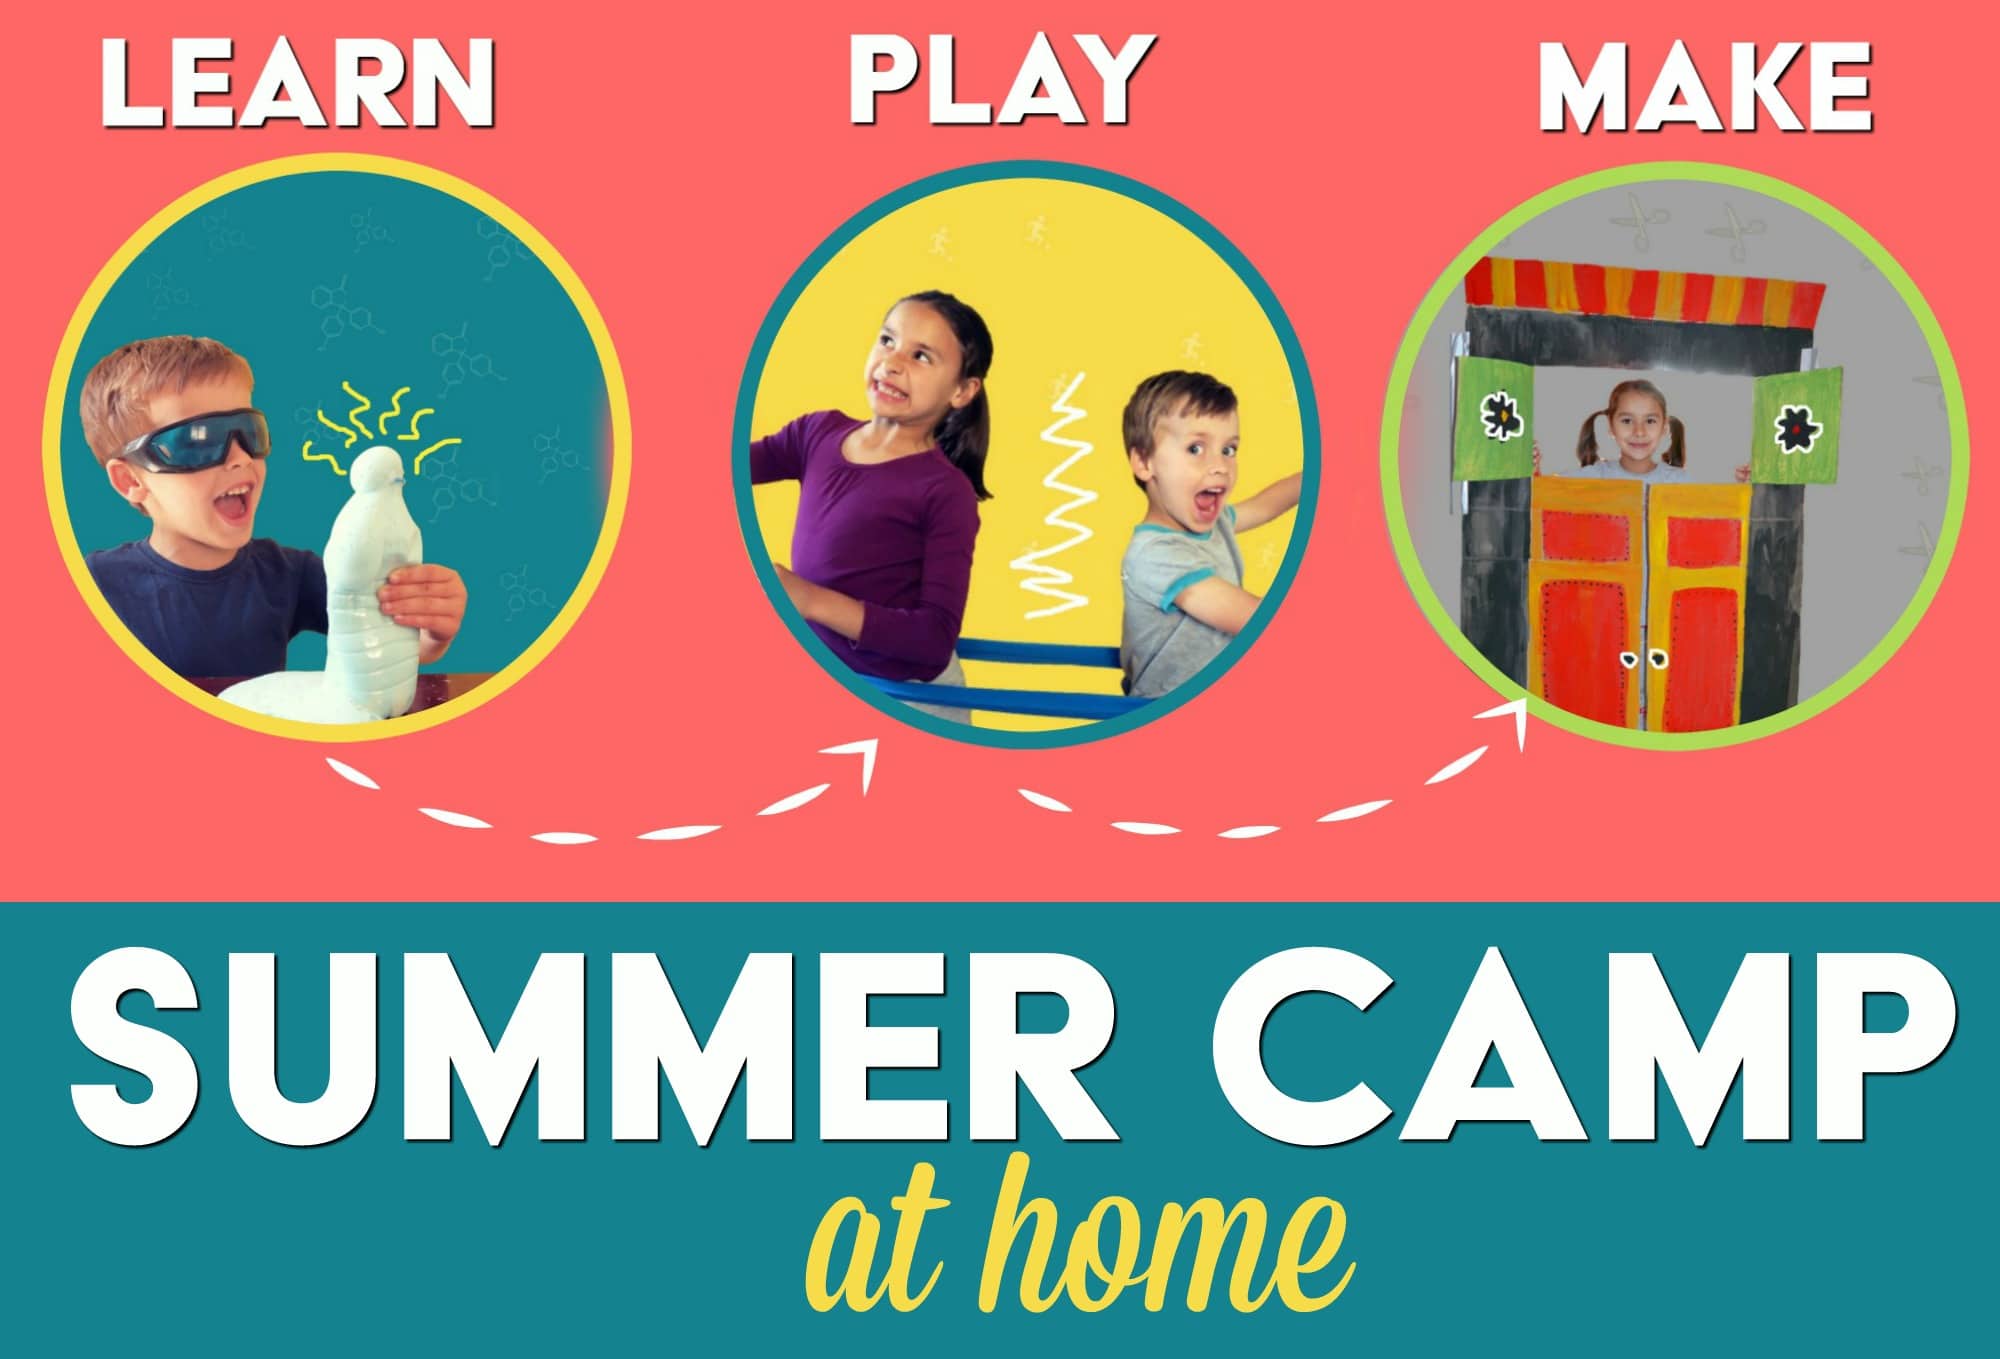 Summer camp at home poster.